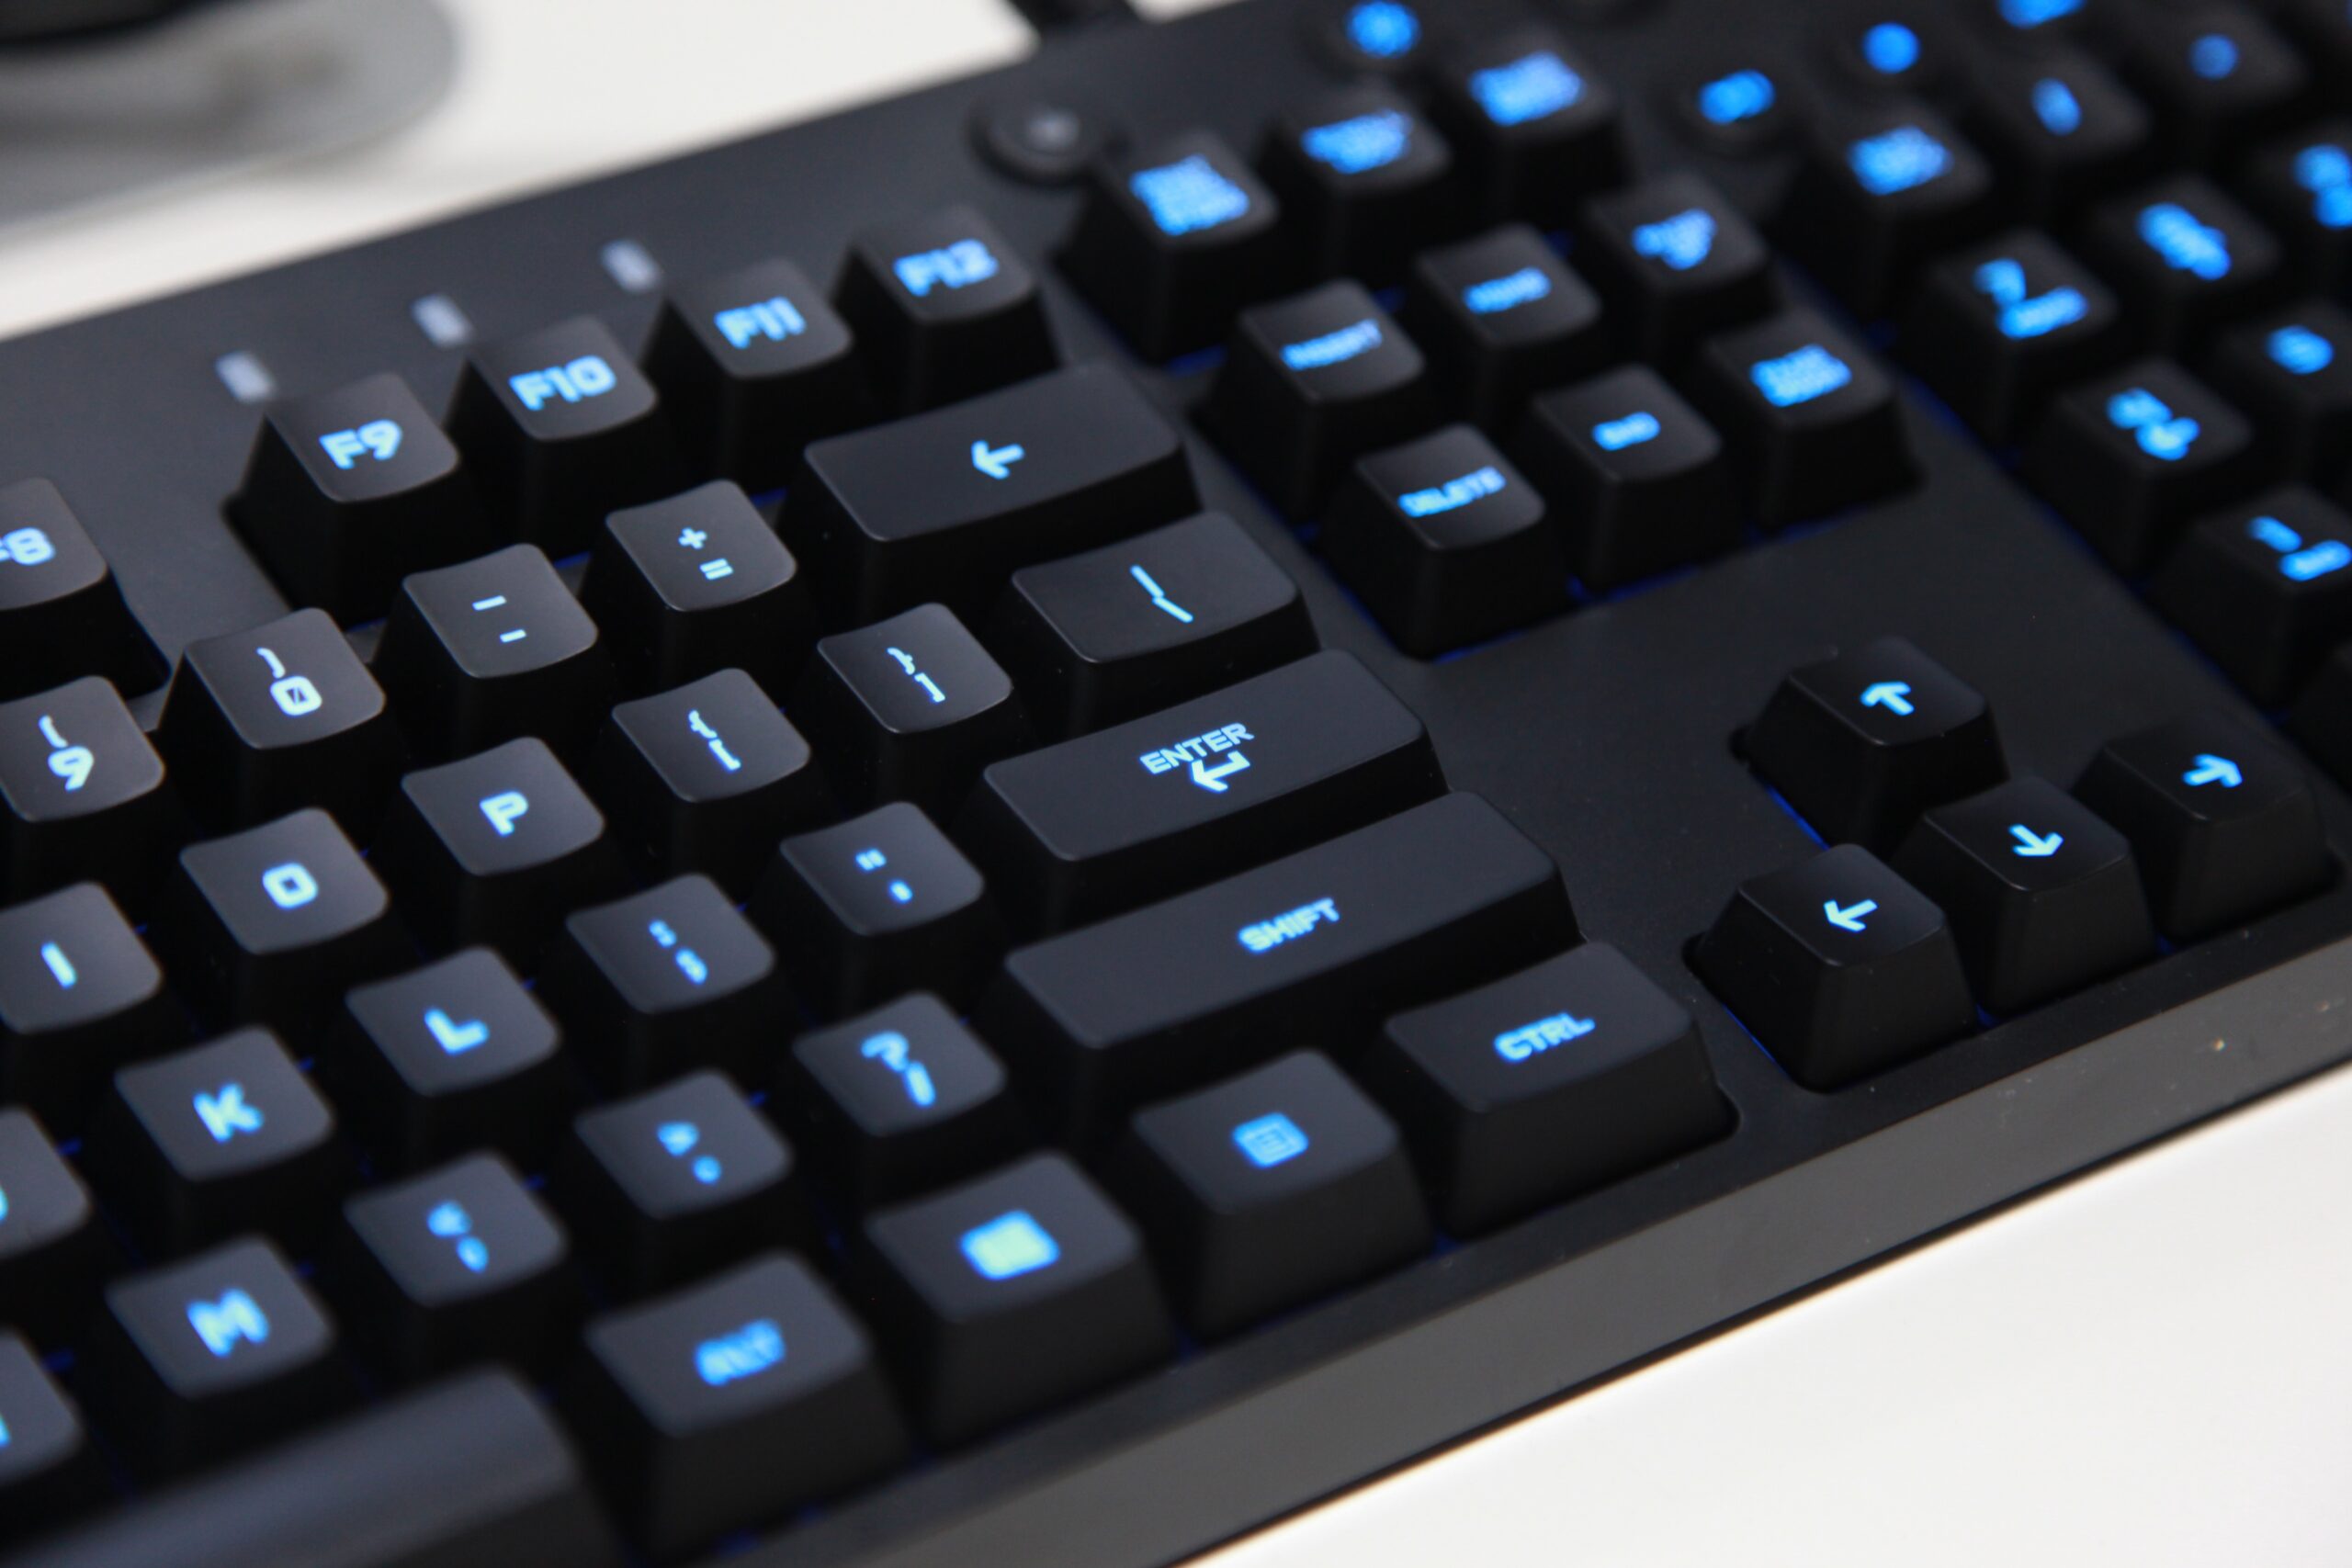 Logitech’s G810 Keyboard Is The Gaming Keyboard You’ll Want To Bring To Work